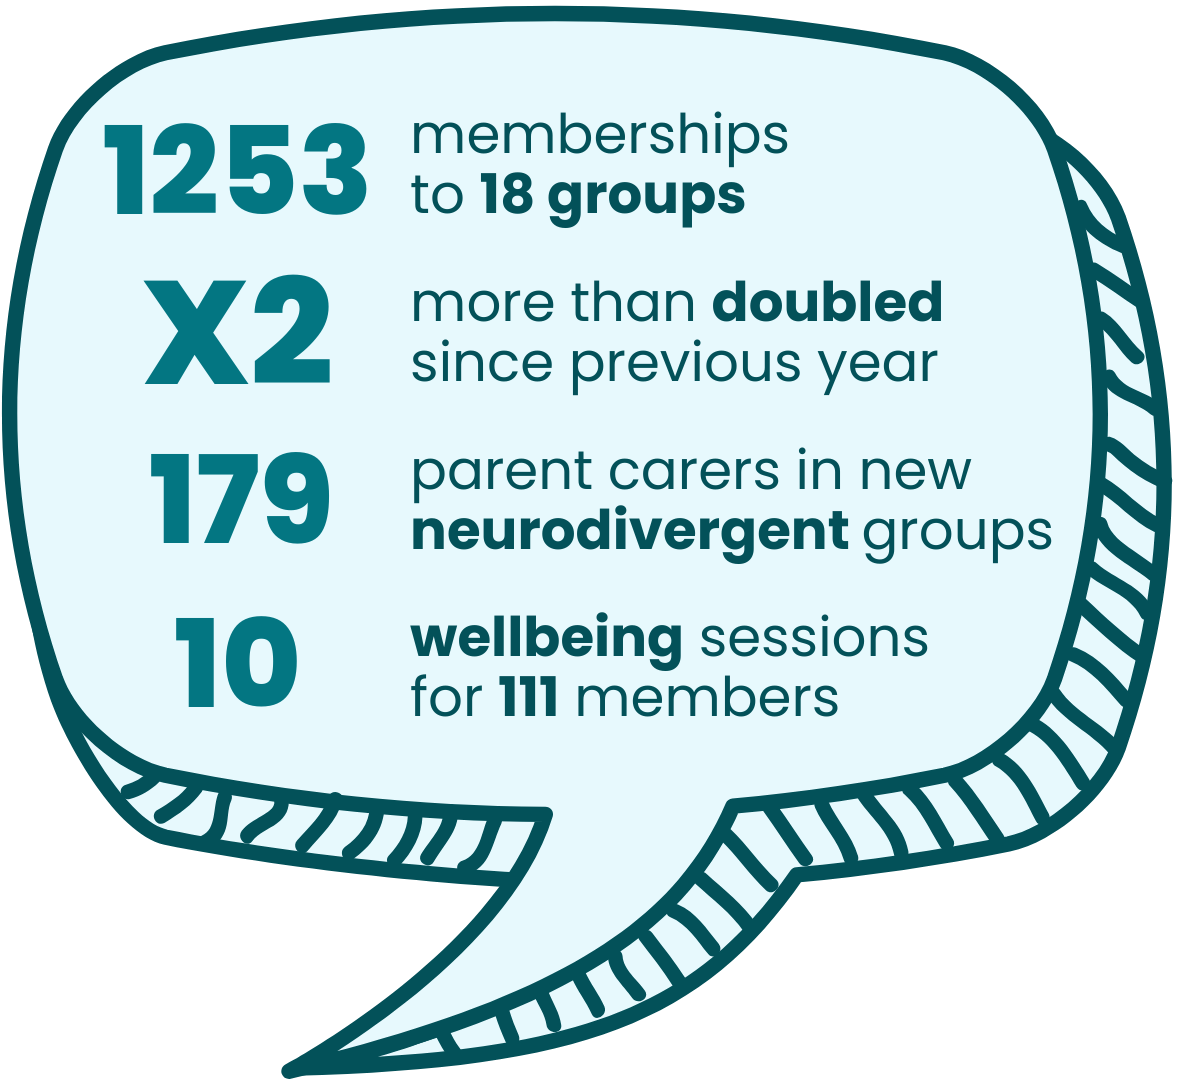 1253 memberships to 18 groups. More than doubled since previous year. 179 parent carers in new neurodivergent groups. 10 wellbeing sessions for 111 members.